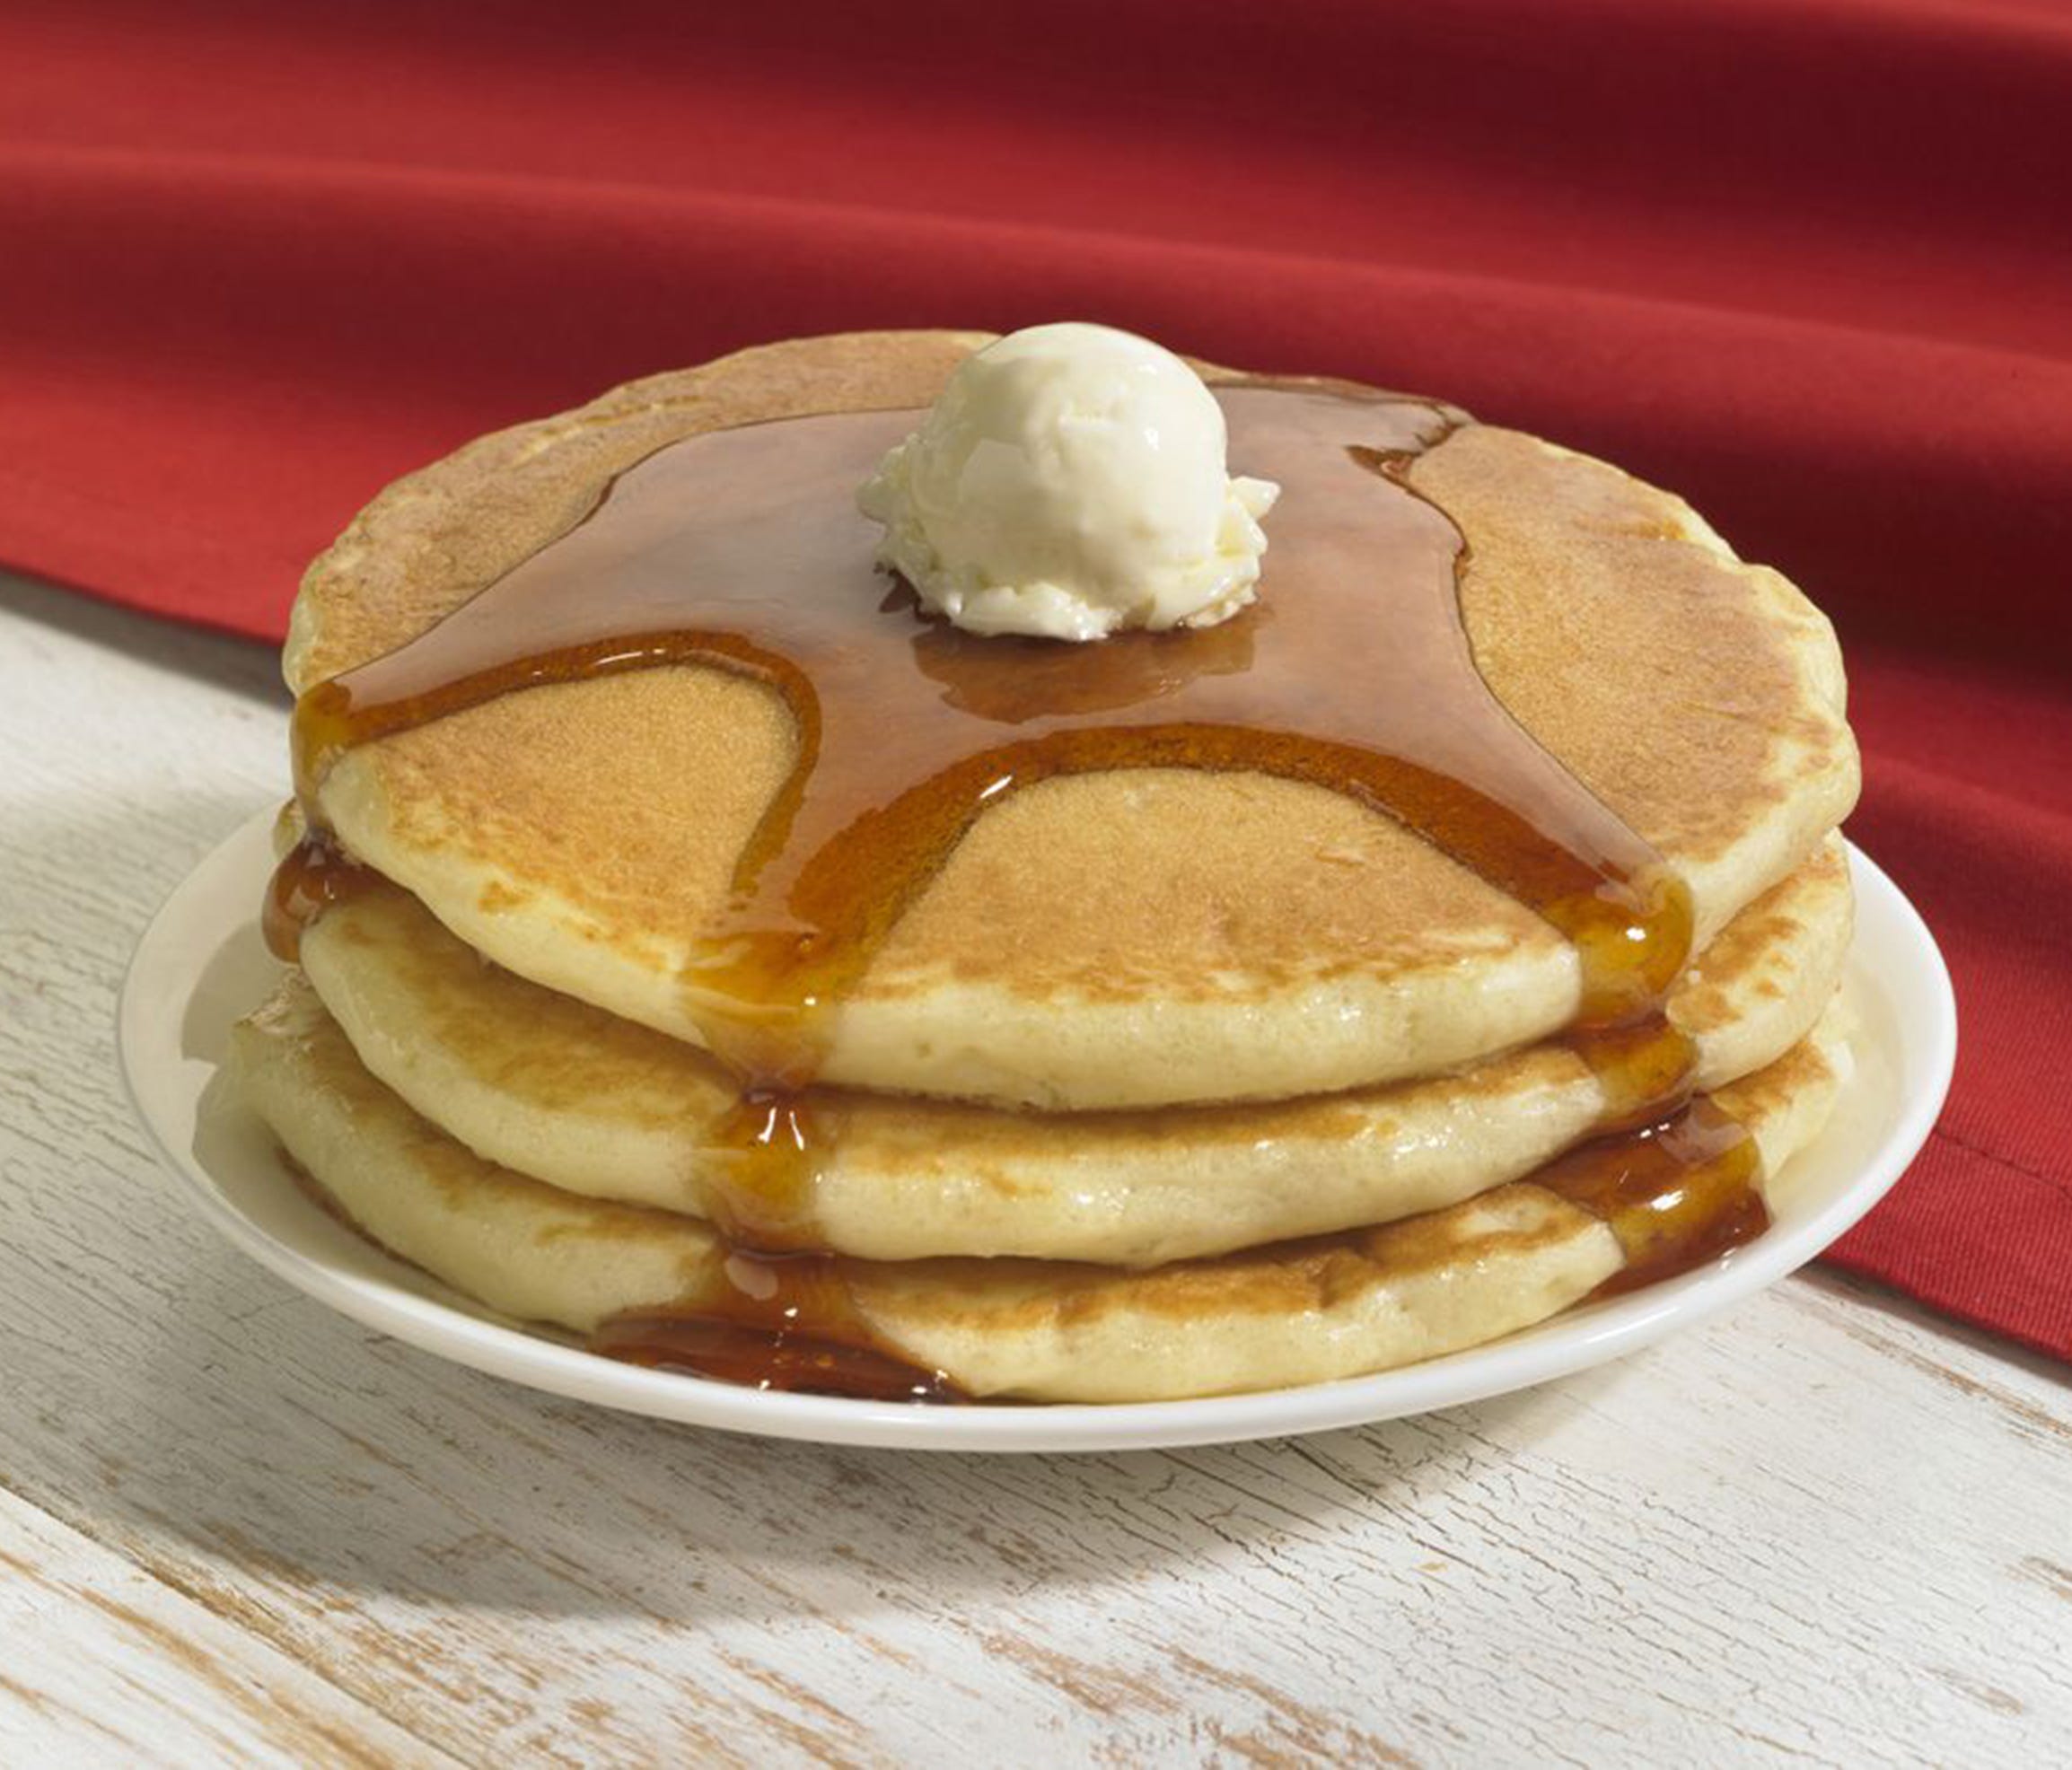 IHOP has declared March 7, 2017, as its 12th National Pancake Day. Diners can get a free short stack of three buttermilk pancakes, and the restaurant chain hopes they'll donate to children's charities that IHOP has as its partners.